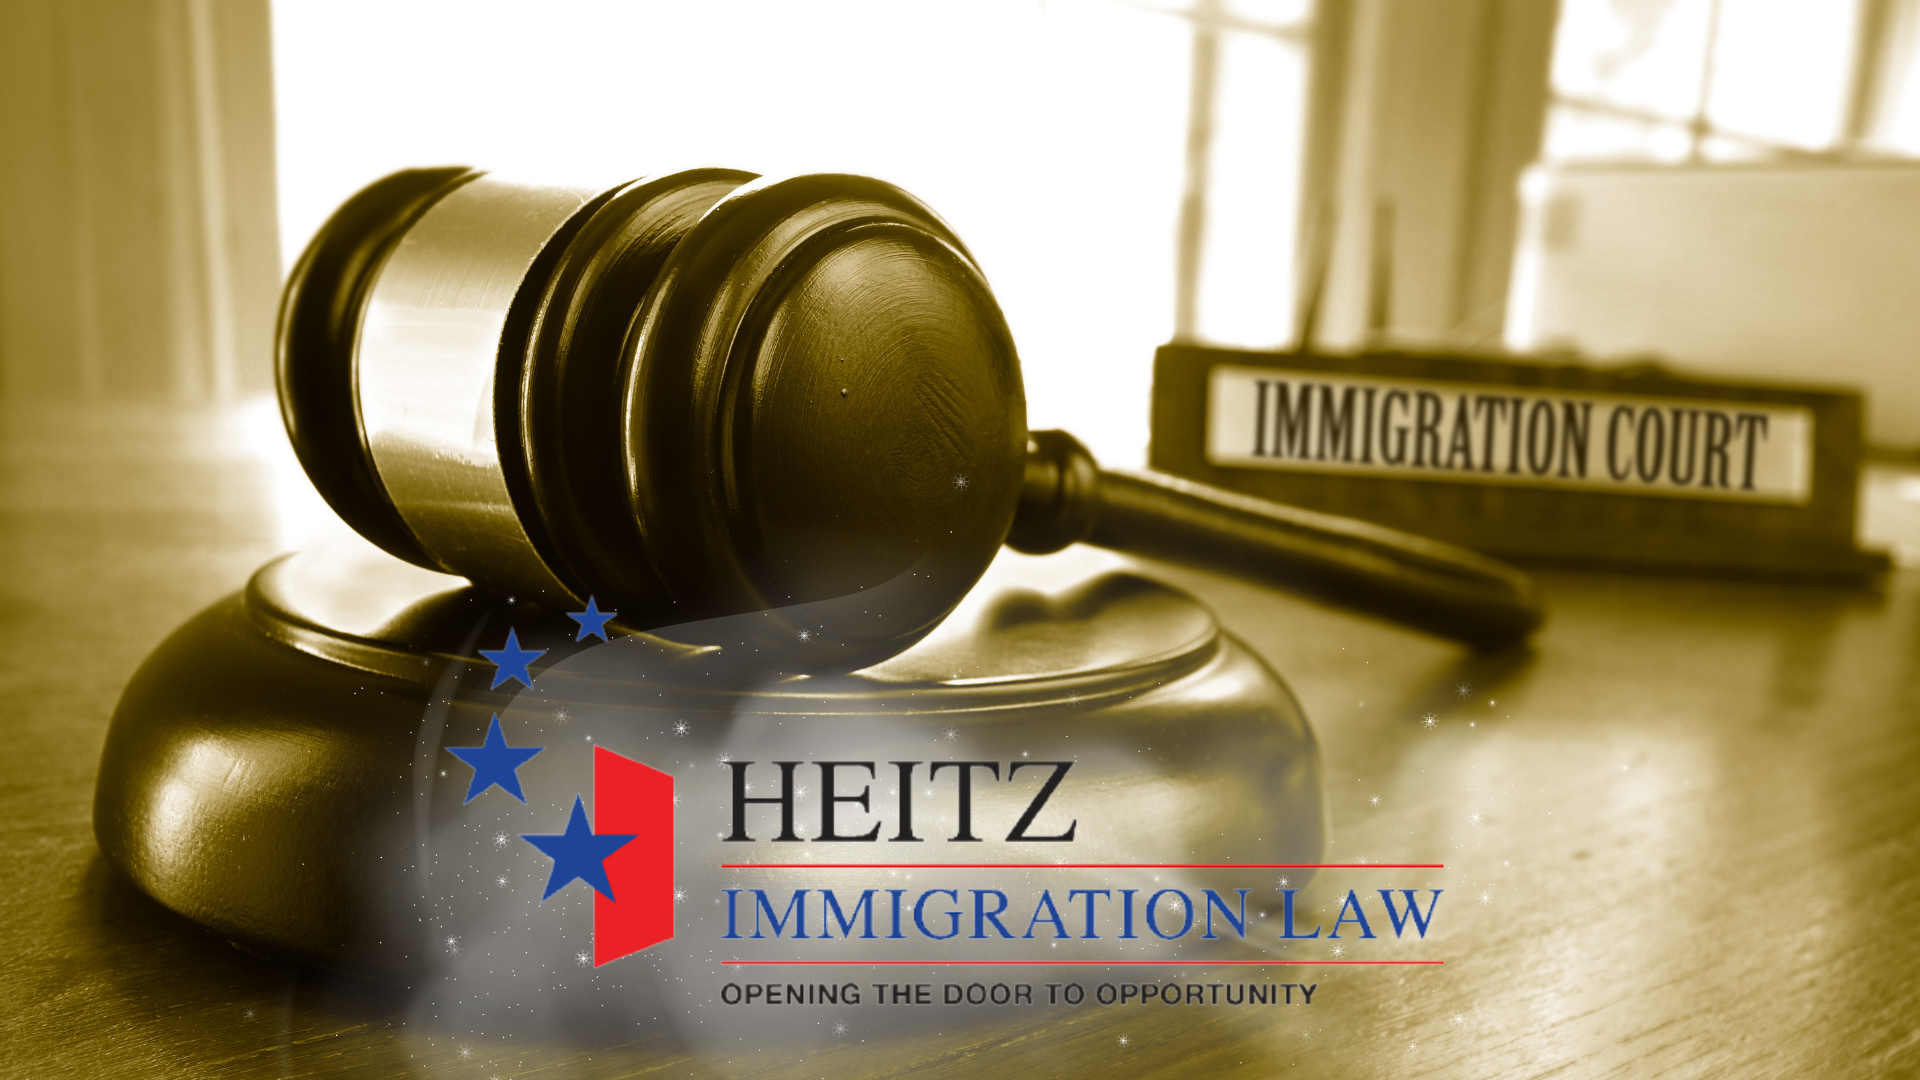 Are you in Immigration Court? Stay Current and Stay Prepared